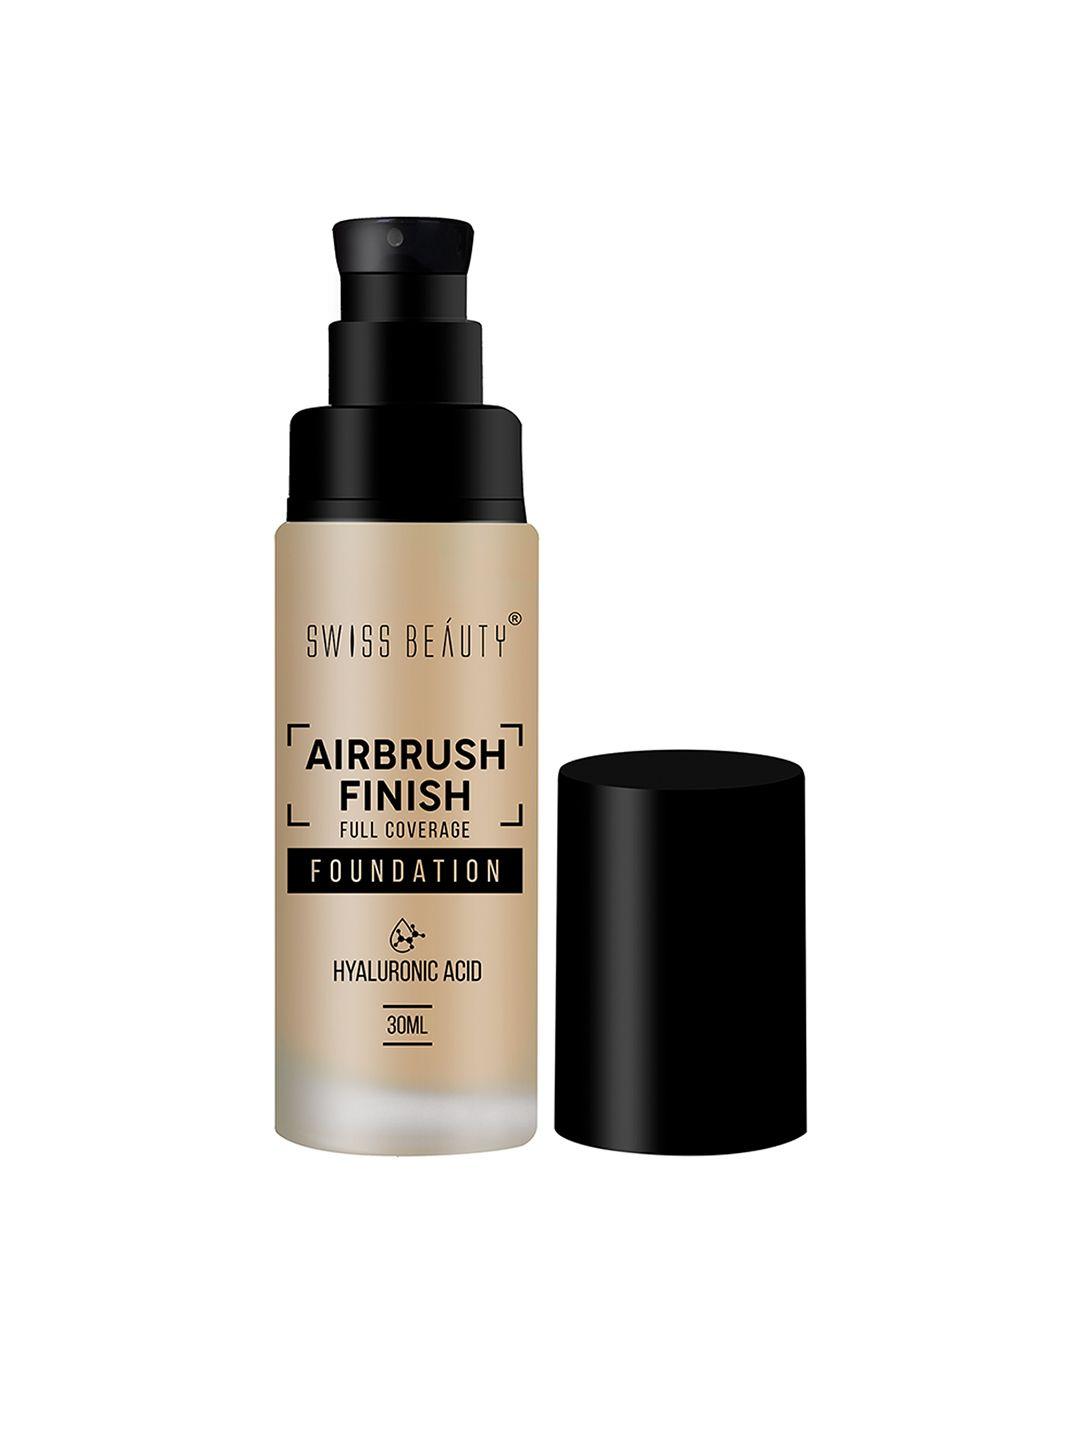 swiss beauty airbrush finish full coverage foundation with hyaluronic acid 30ml-nude beige